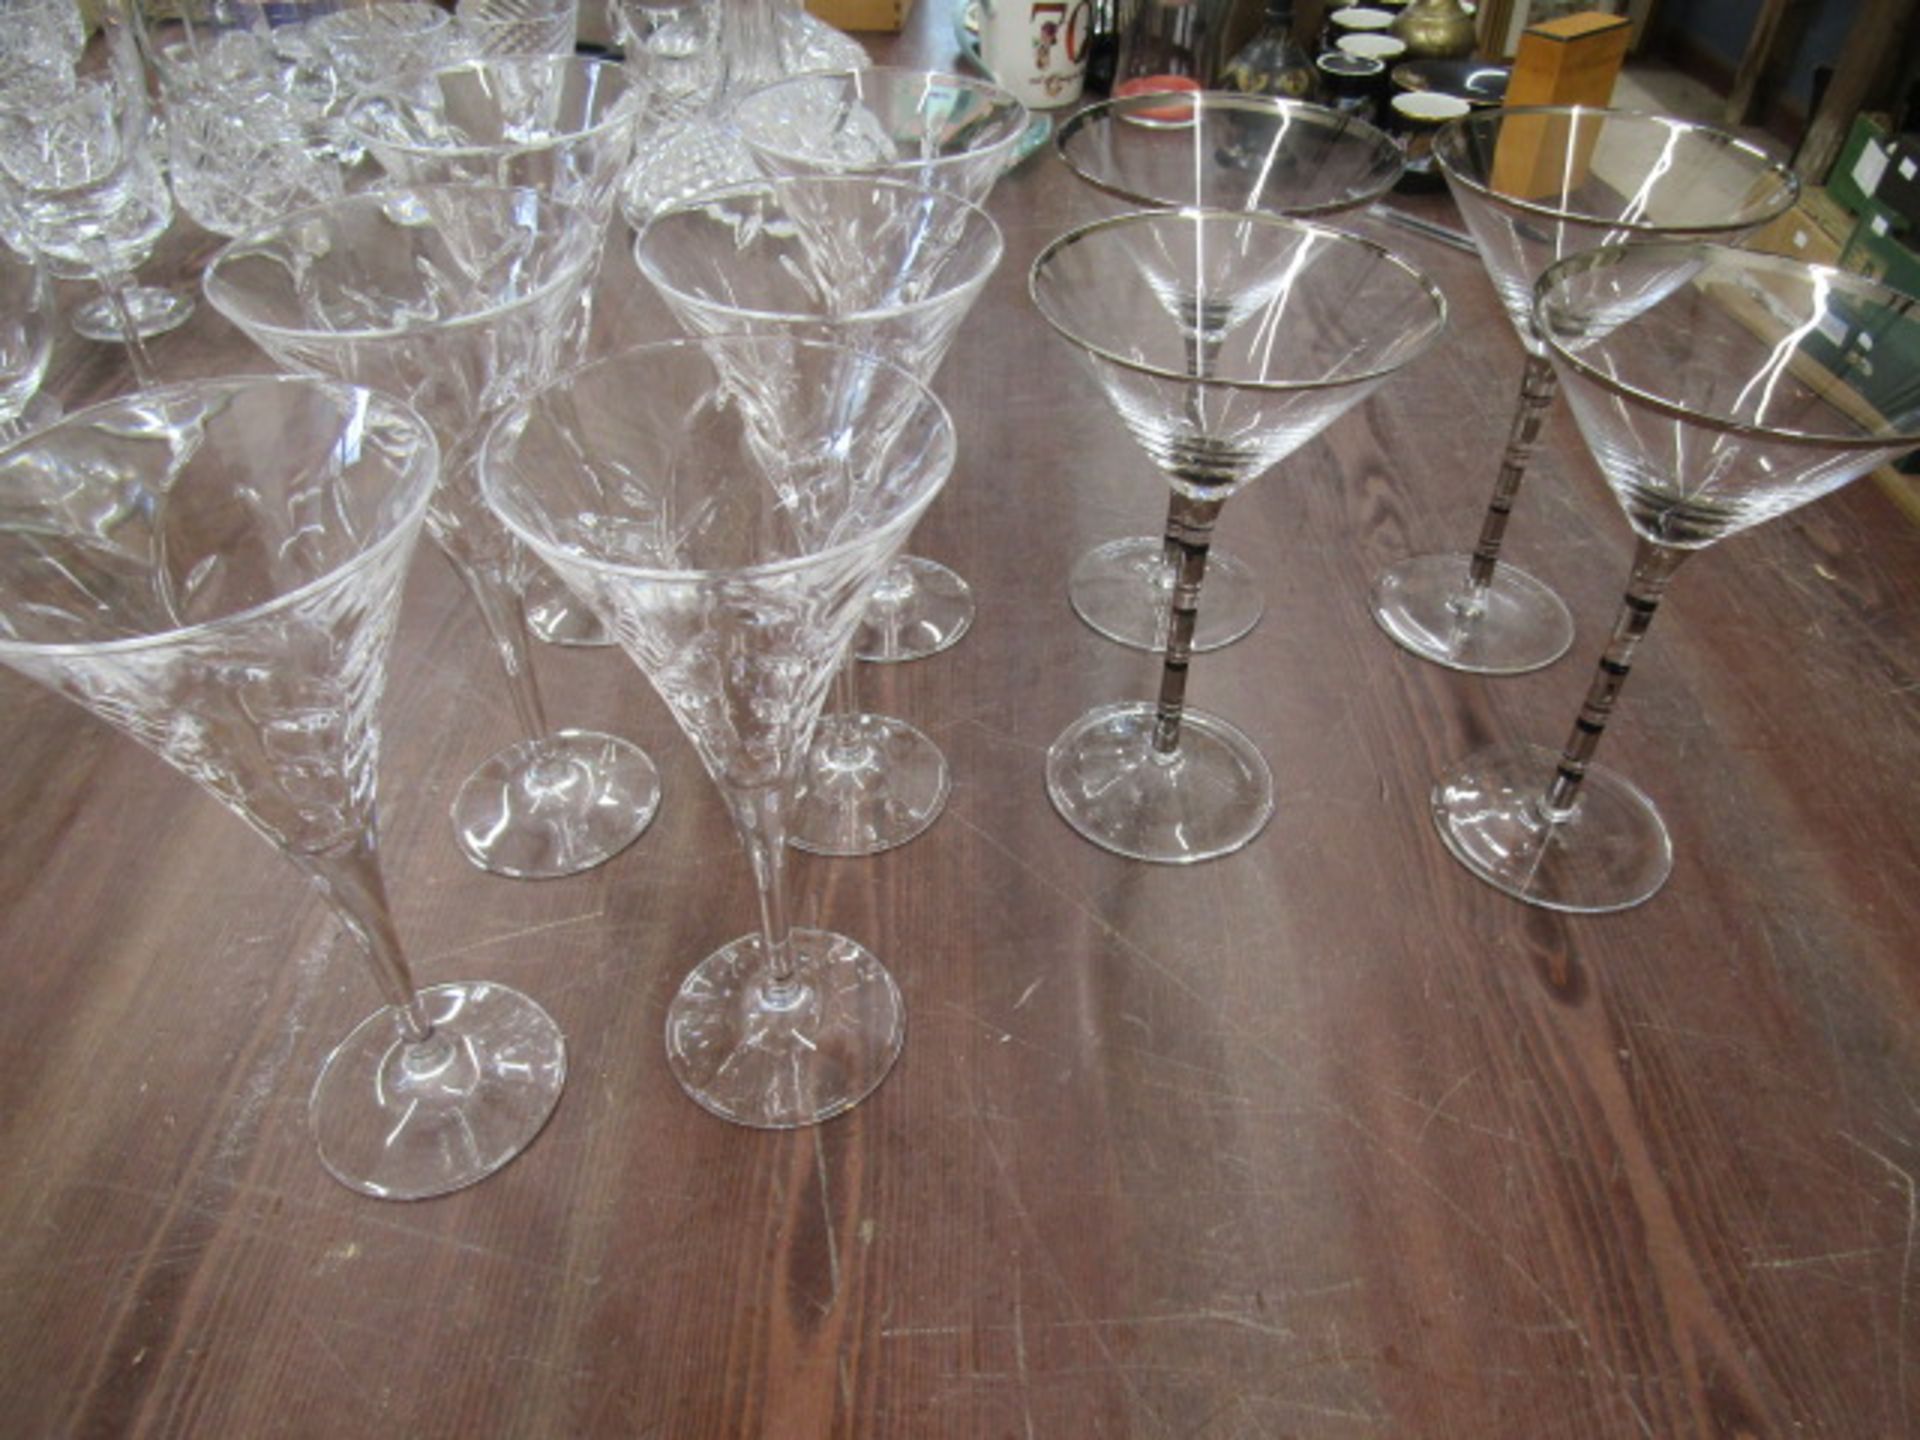 Wine glasses, cocktail, Babycham, cut glass- various glass ware, most good quality - Image 2 of 6